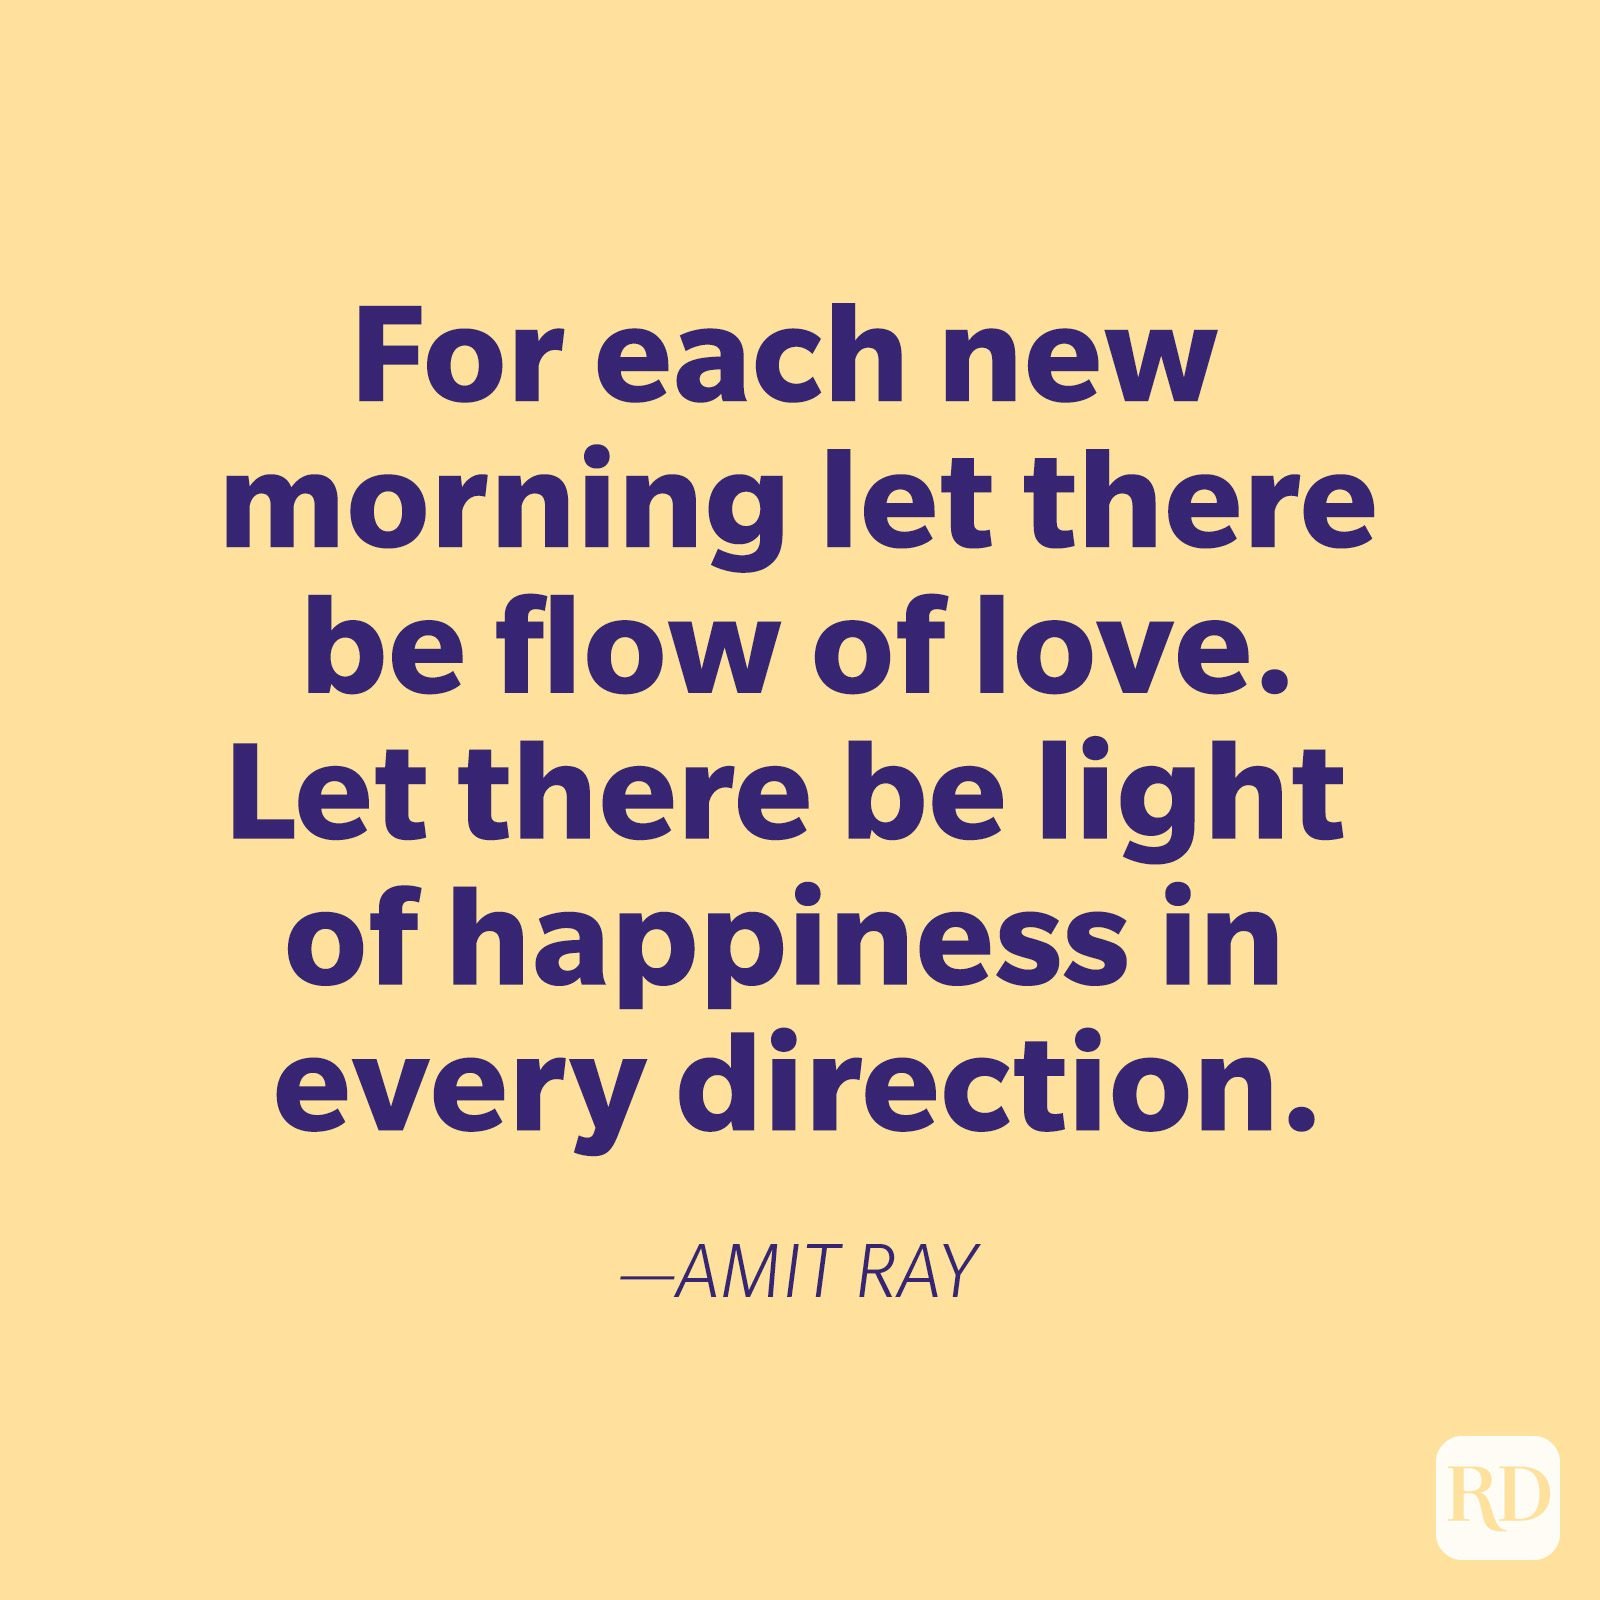 75 Good Morning Quotes, Sayings, and Messages | Reader's Digest